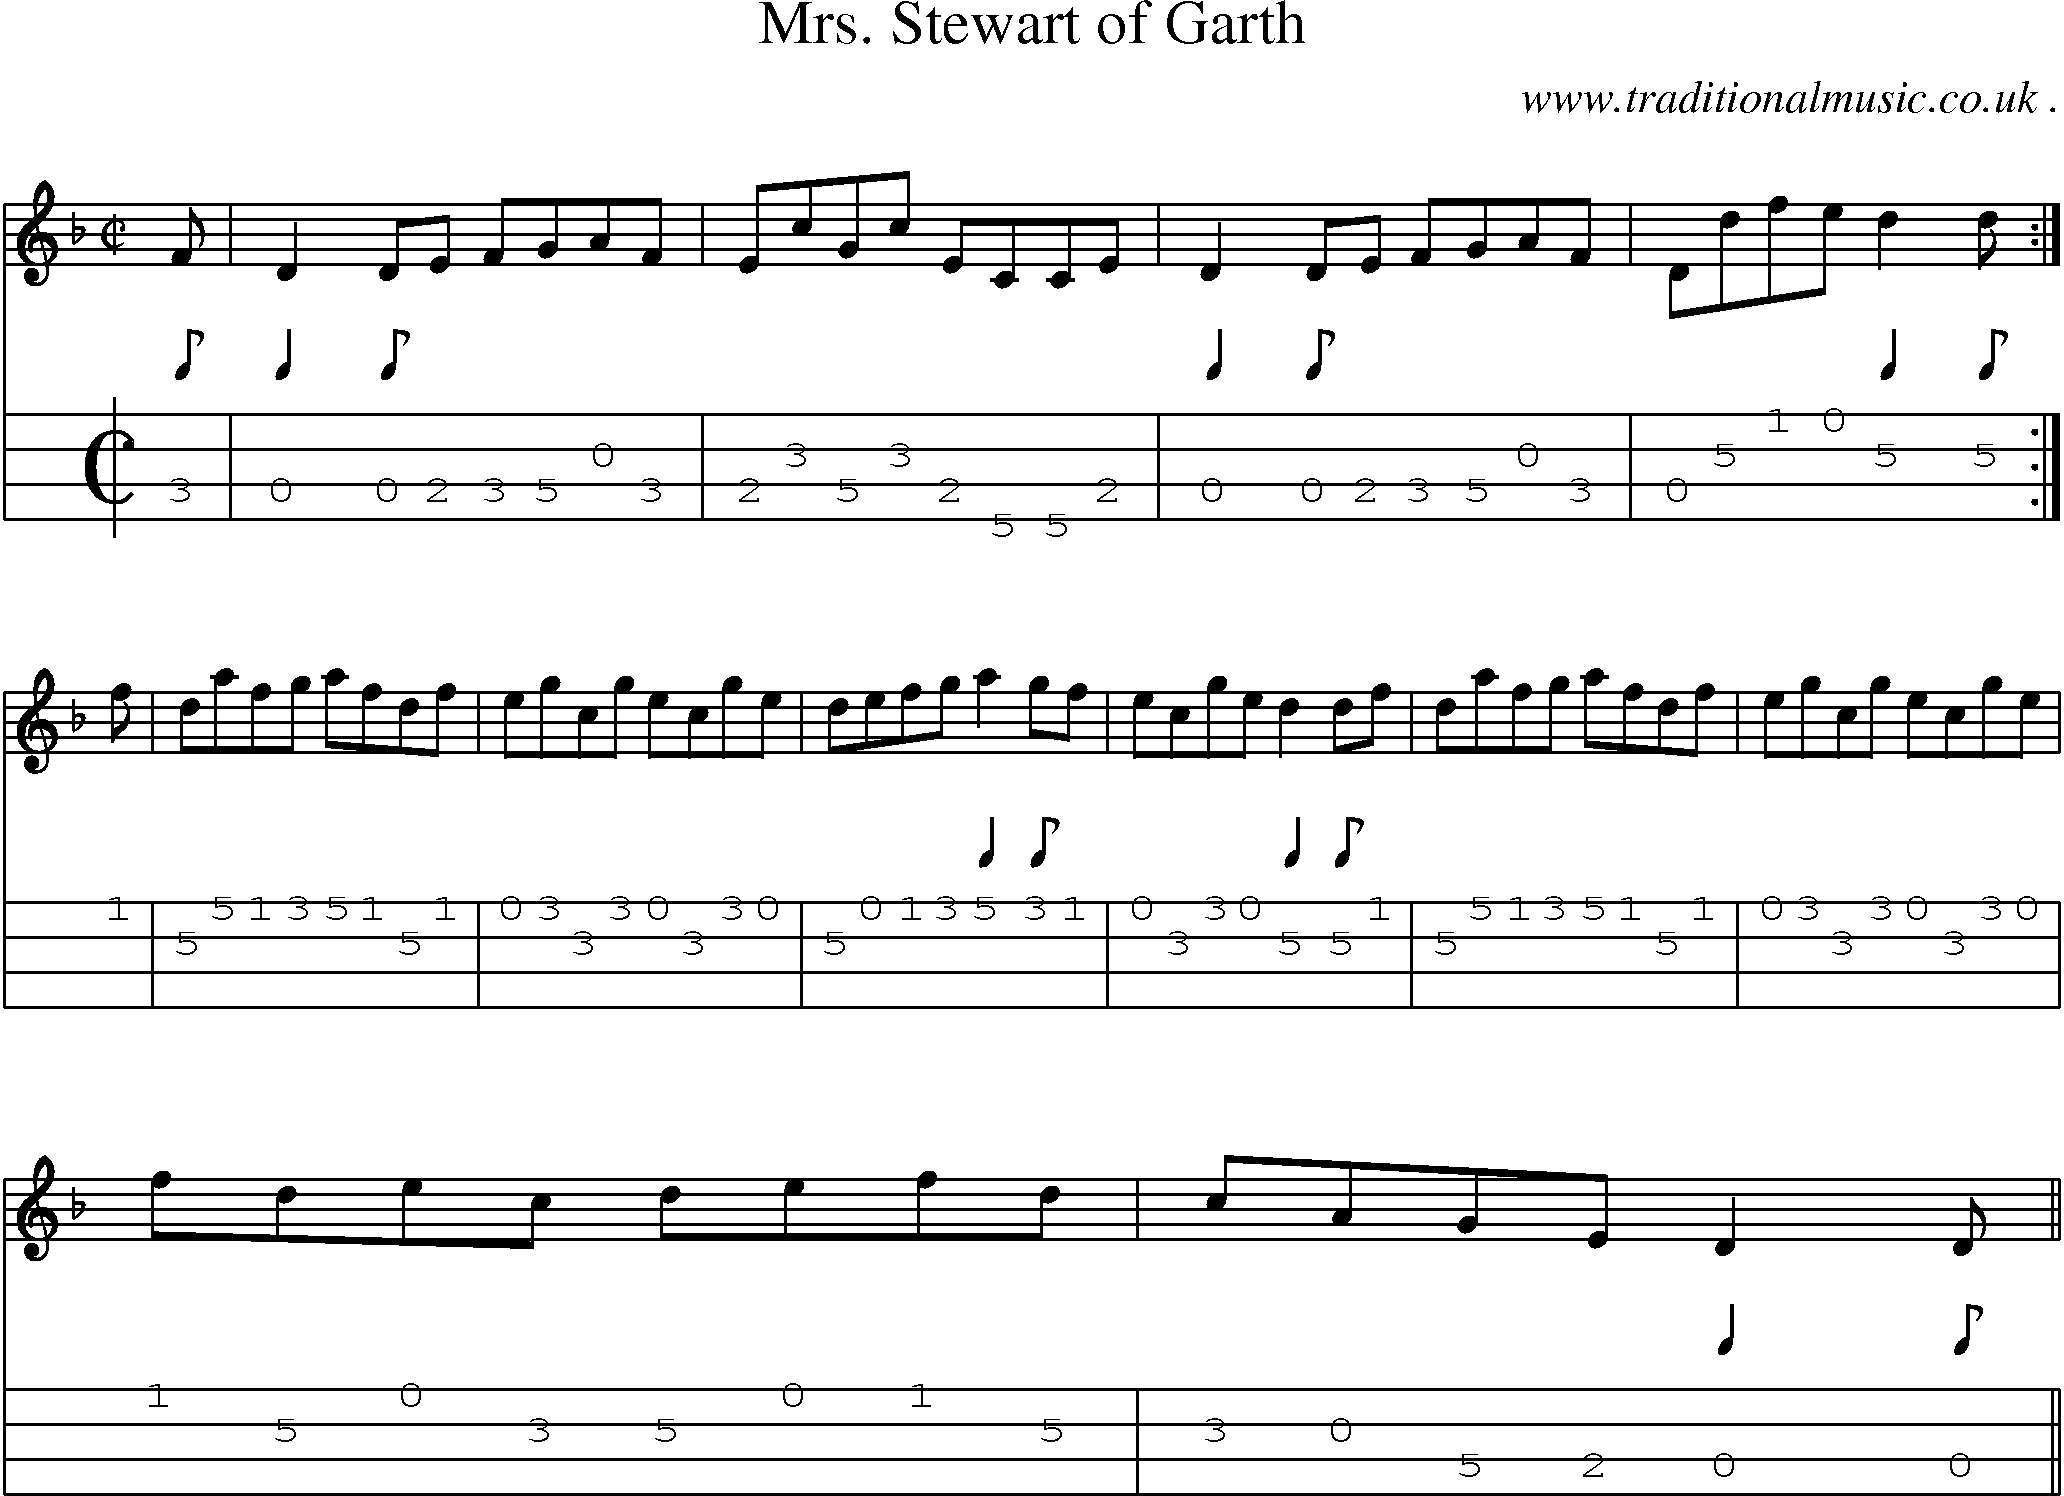 Sheet-music  score, Chords and Mandolin Tabs for Mrs Stewart Of Garth